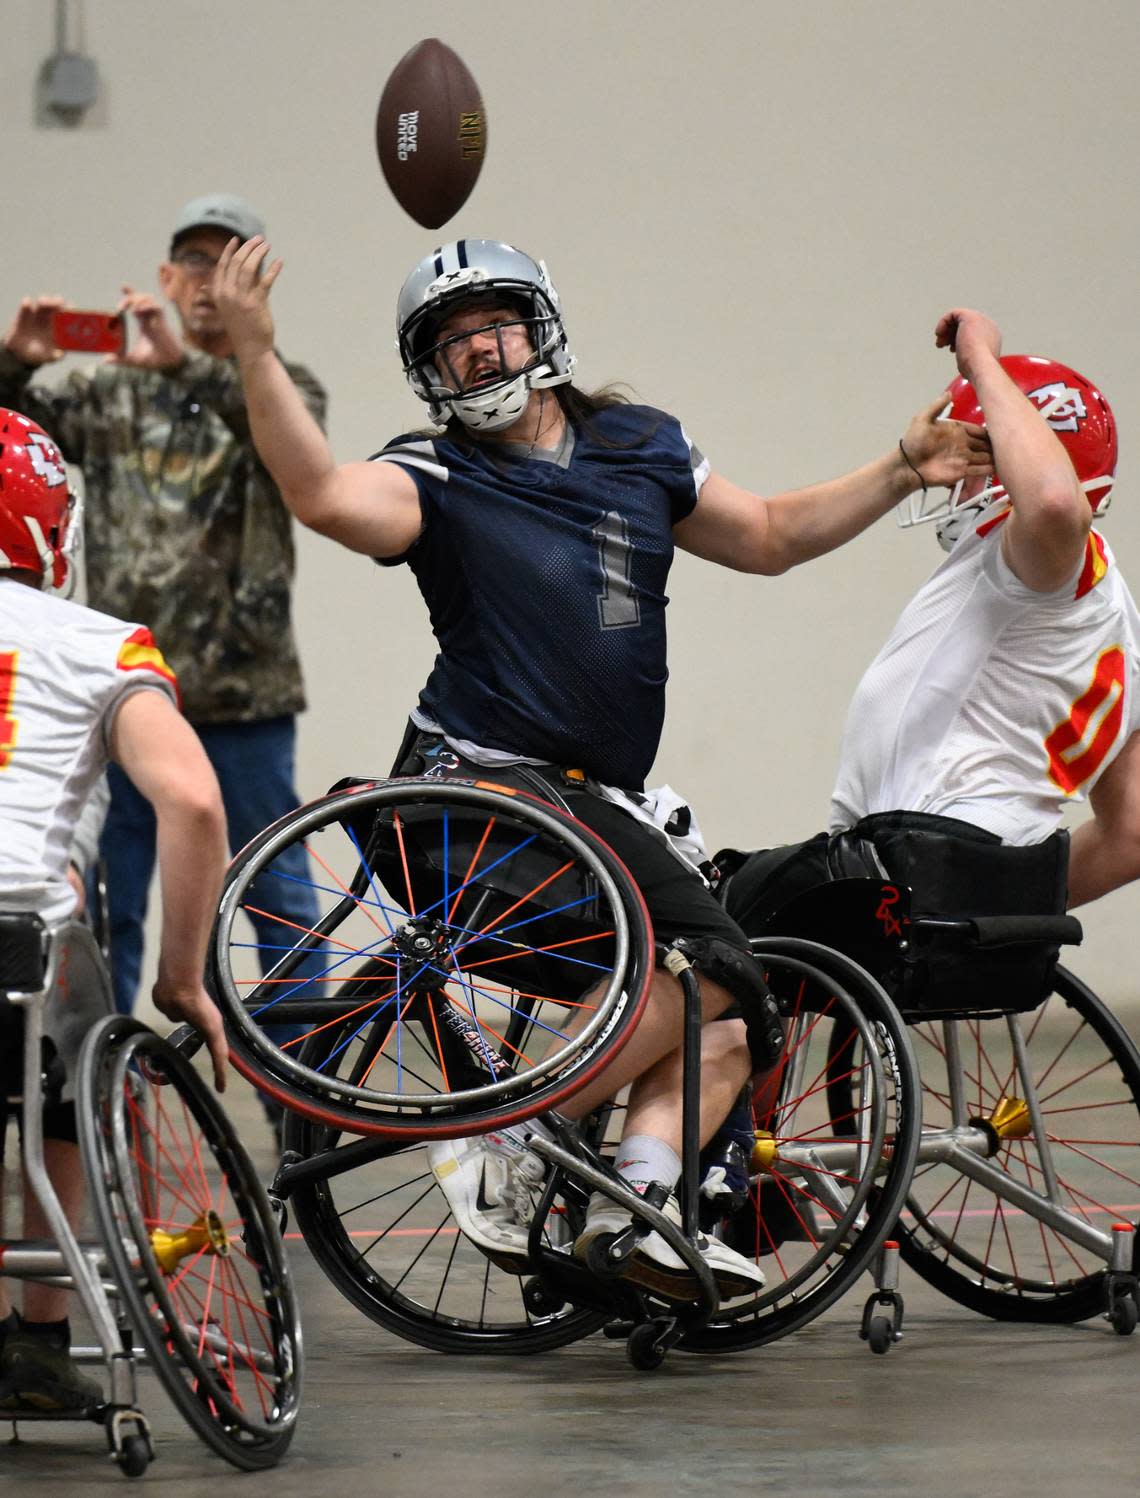 Dallas Cowboys player Zach Blair (1) can’t make a catch of this pass while being guarded by Kansas City Chiefs player Clayton Peters (0) during the USA Wheelchair Football League Championship, a program of Move United, Tuesday, Feb. 6, 2024 in Dallas, Texas. Reed Hoffmann/Move United